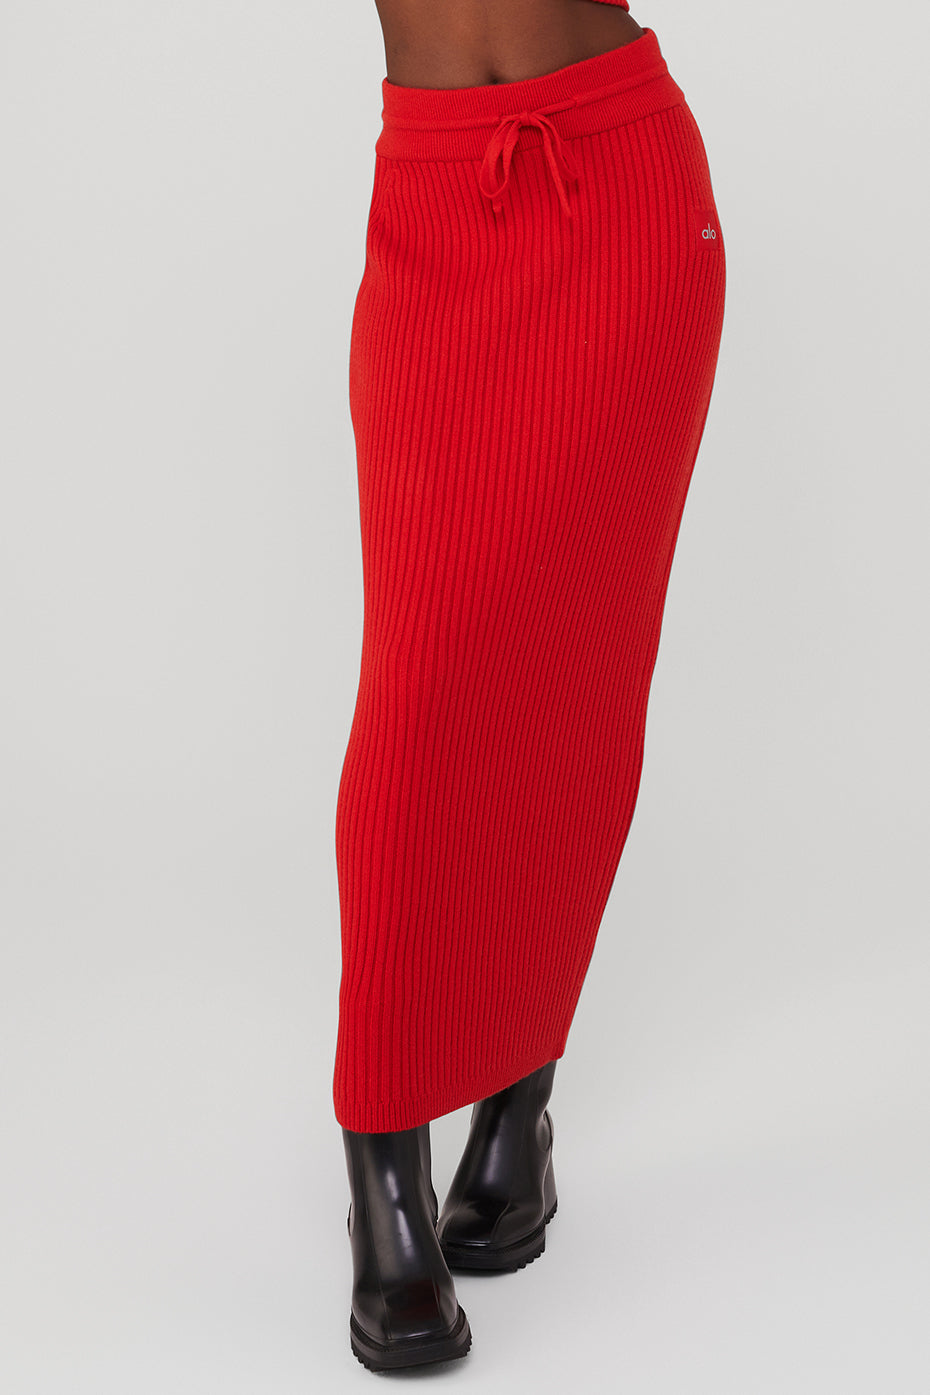 Cashmere Ribbed High-Waist Winter Dream Skirt - Red Flame